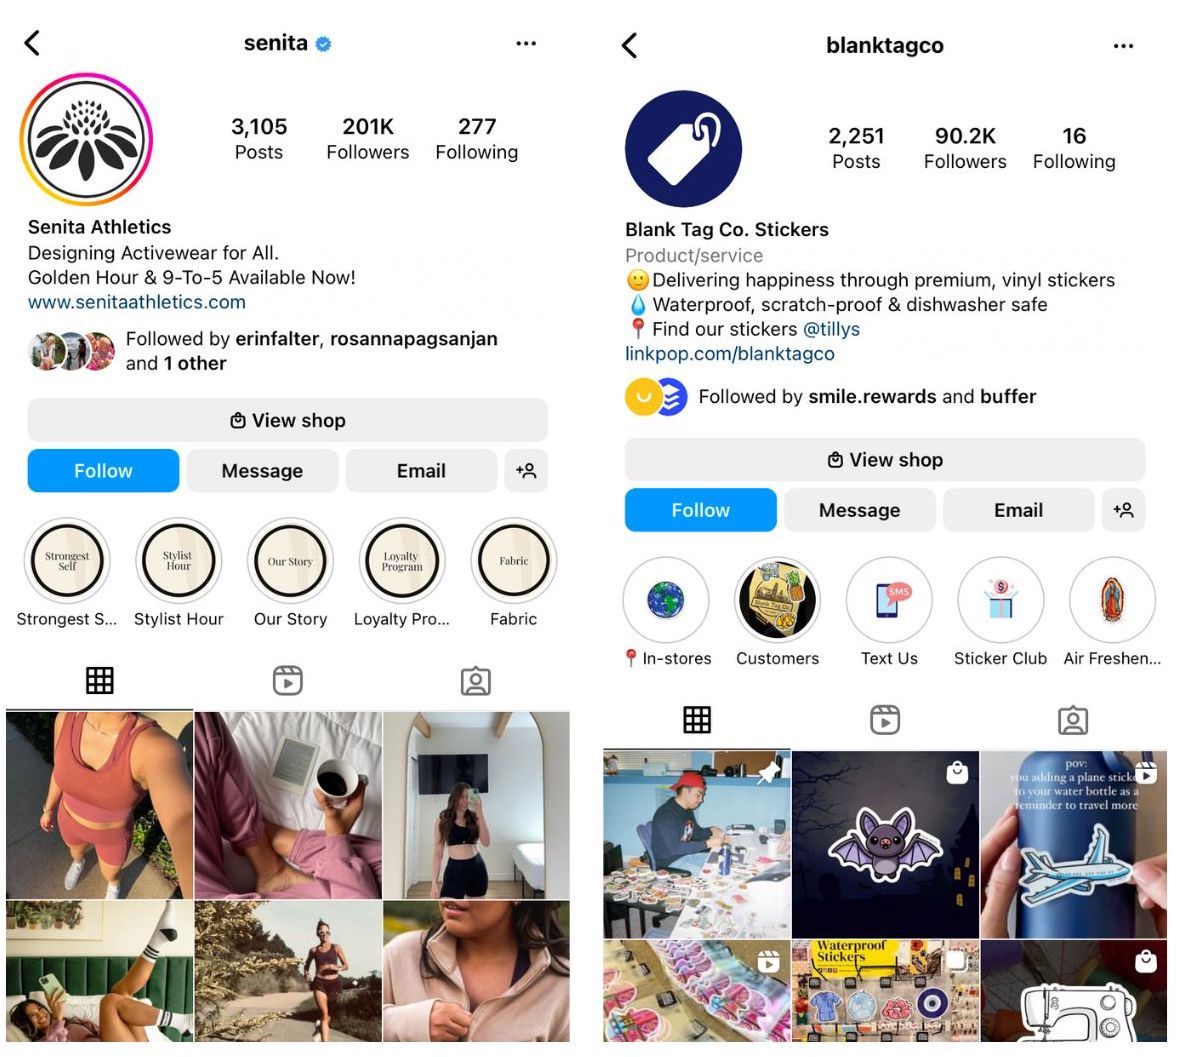 How to Promote Your Loyalty Program on Instagram - screenshots of senita athletics and blank tag co. instagram profile